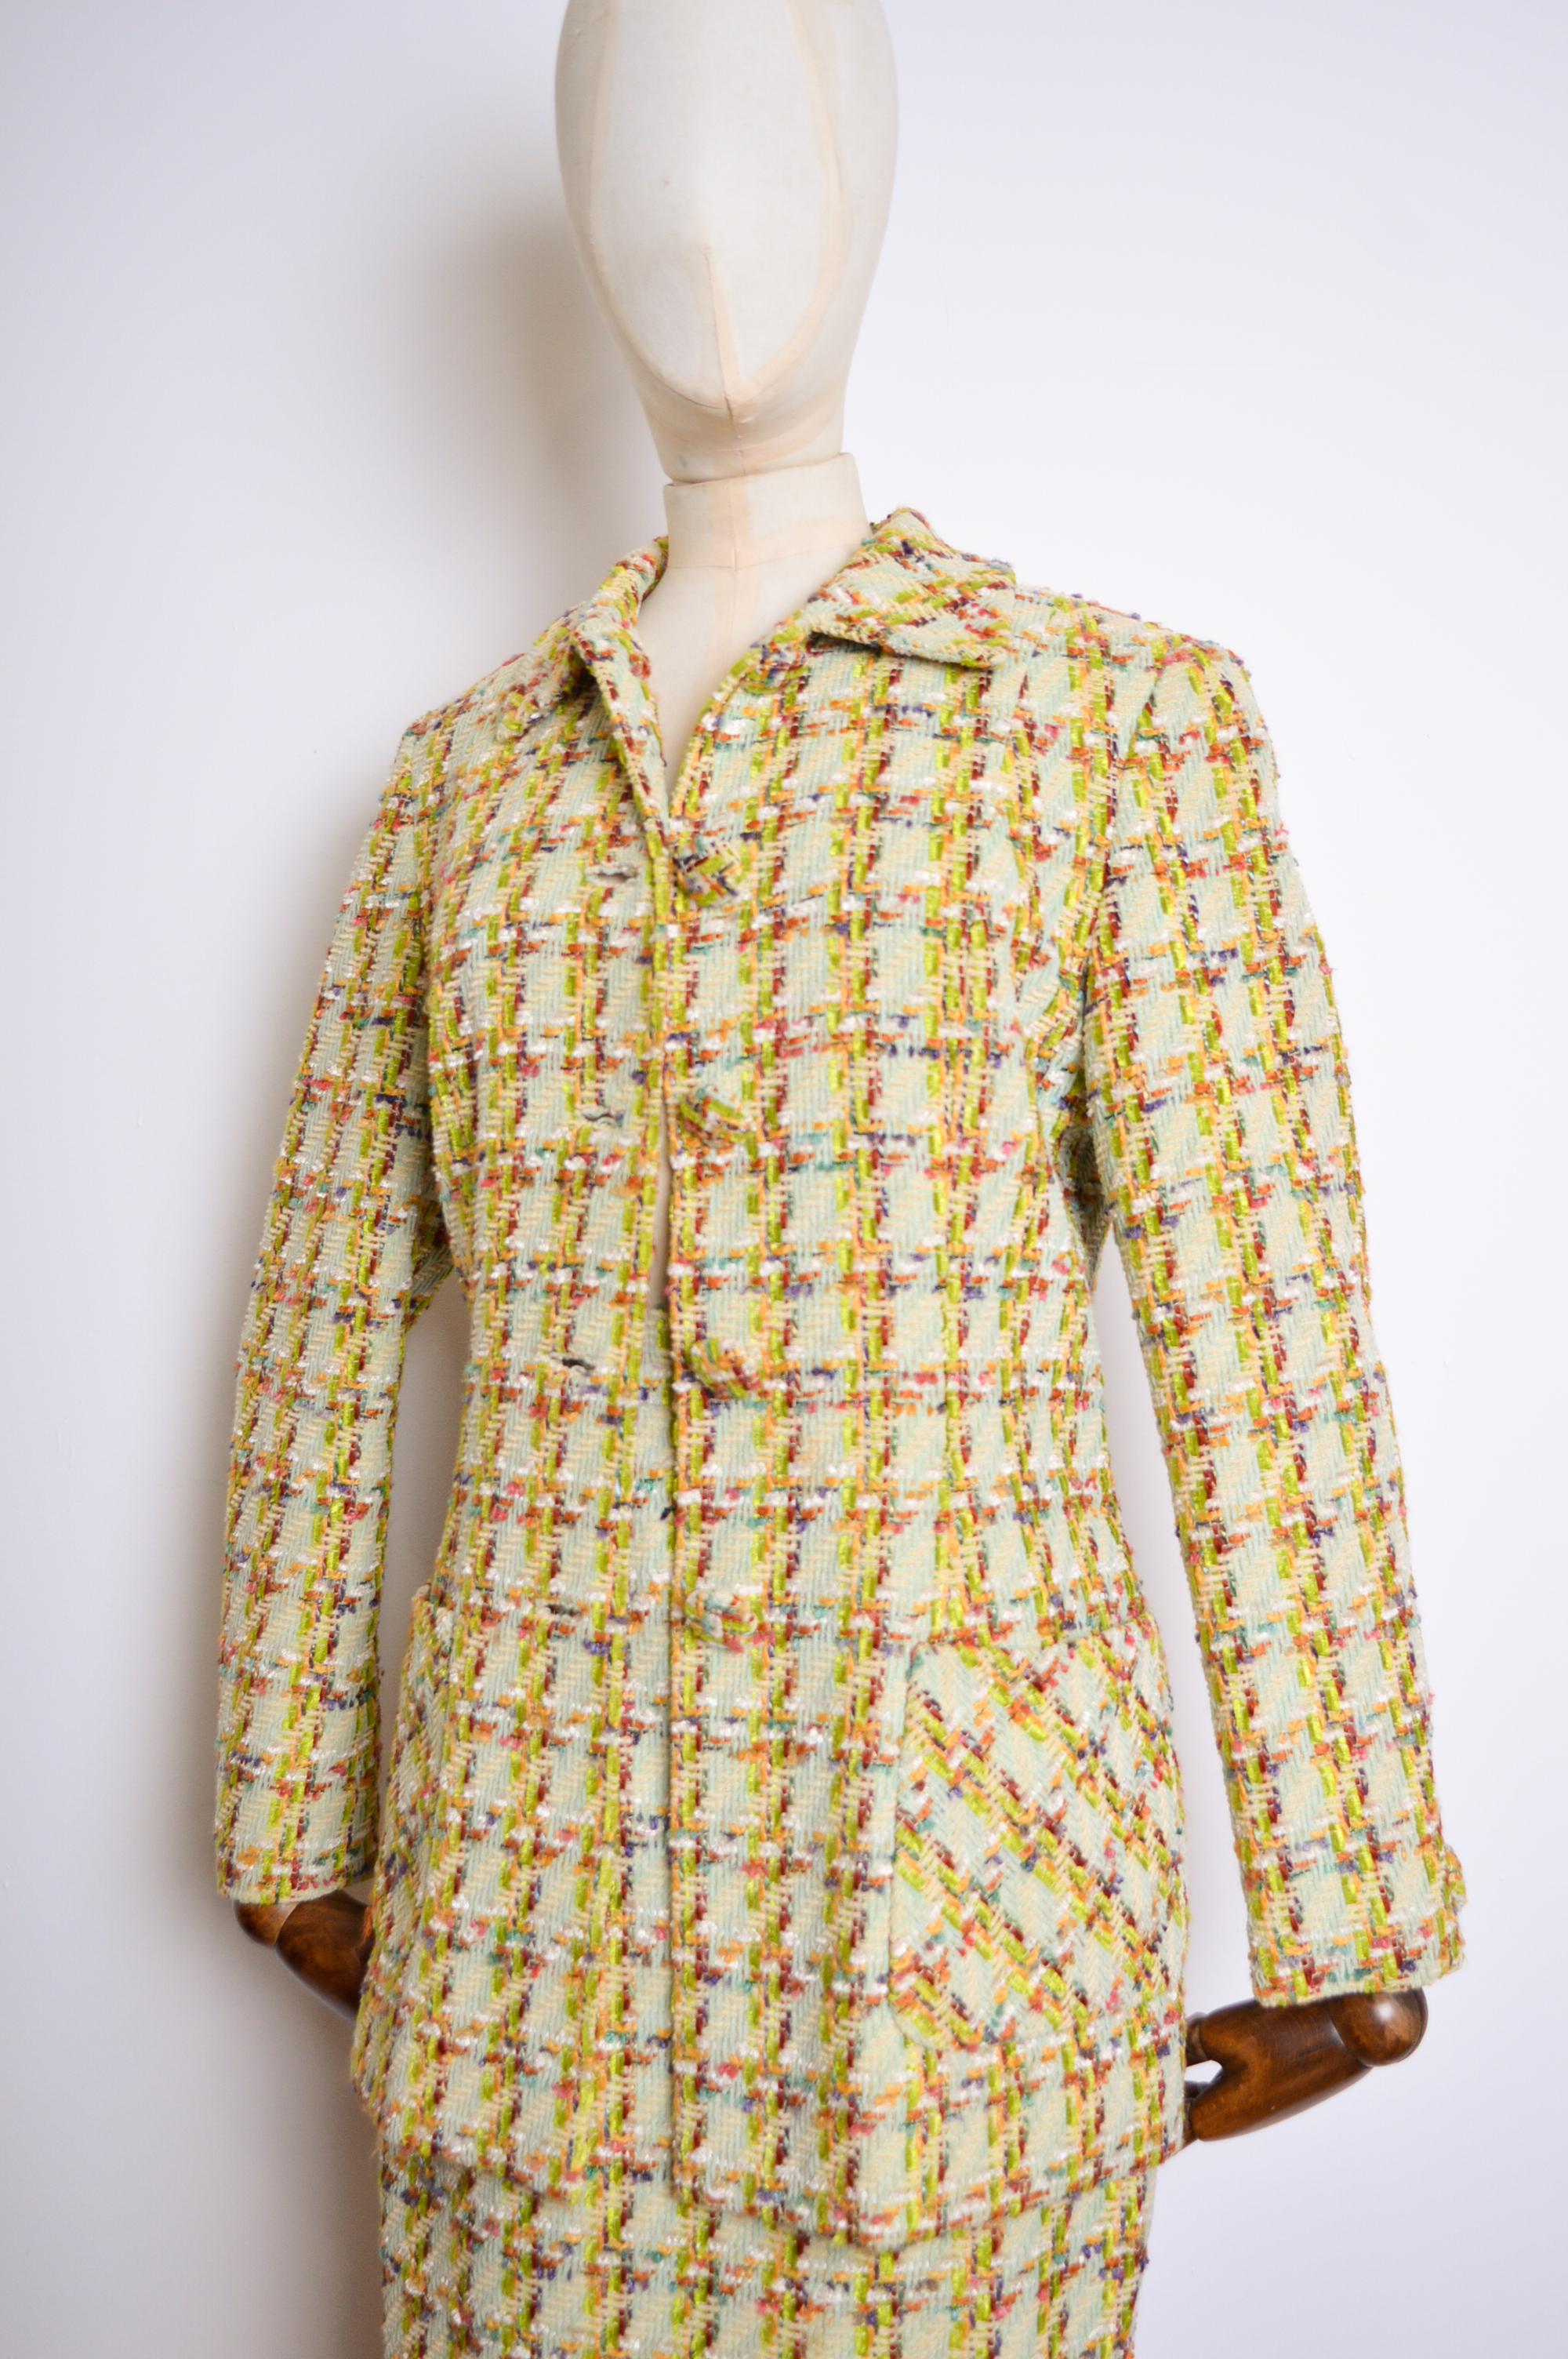 S/S 1993 ROCHAS Jewel Tone Lime Green Tweed Boucle Jacket & Skirt Matching Set For Sale 13